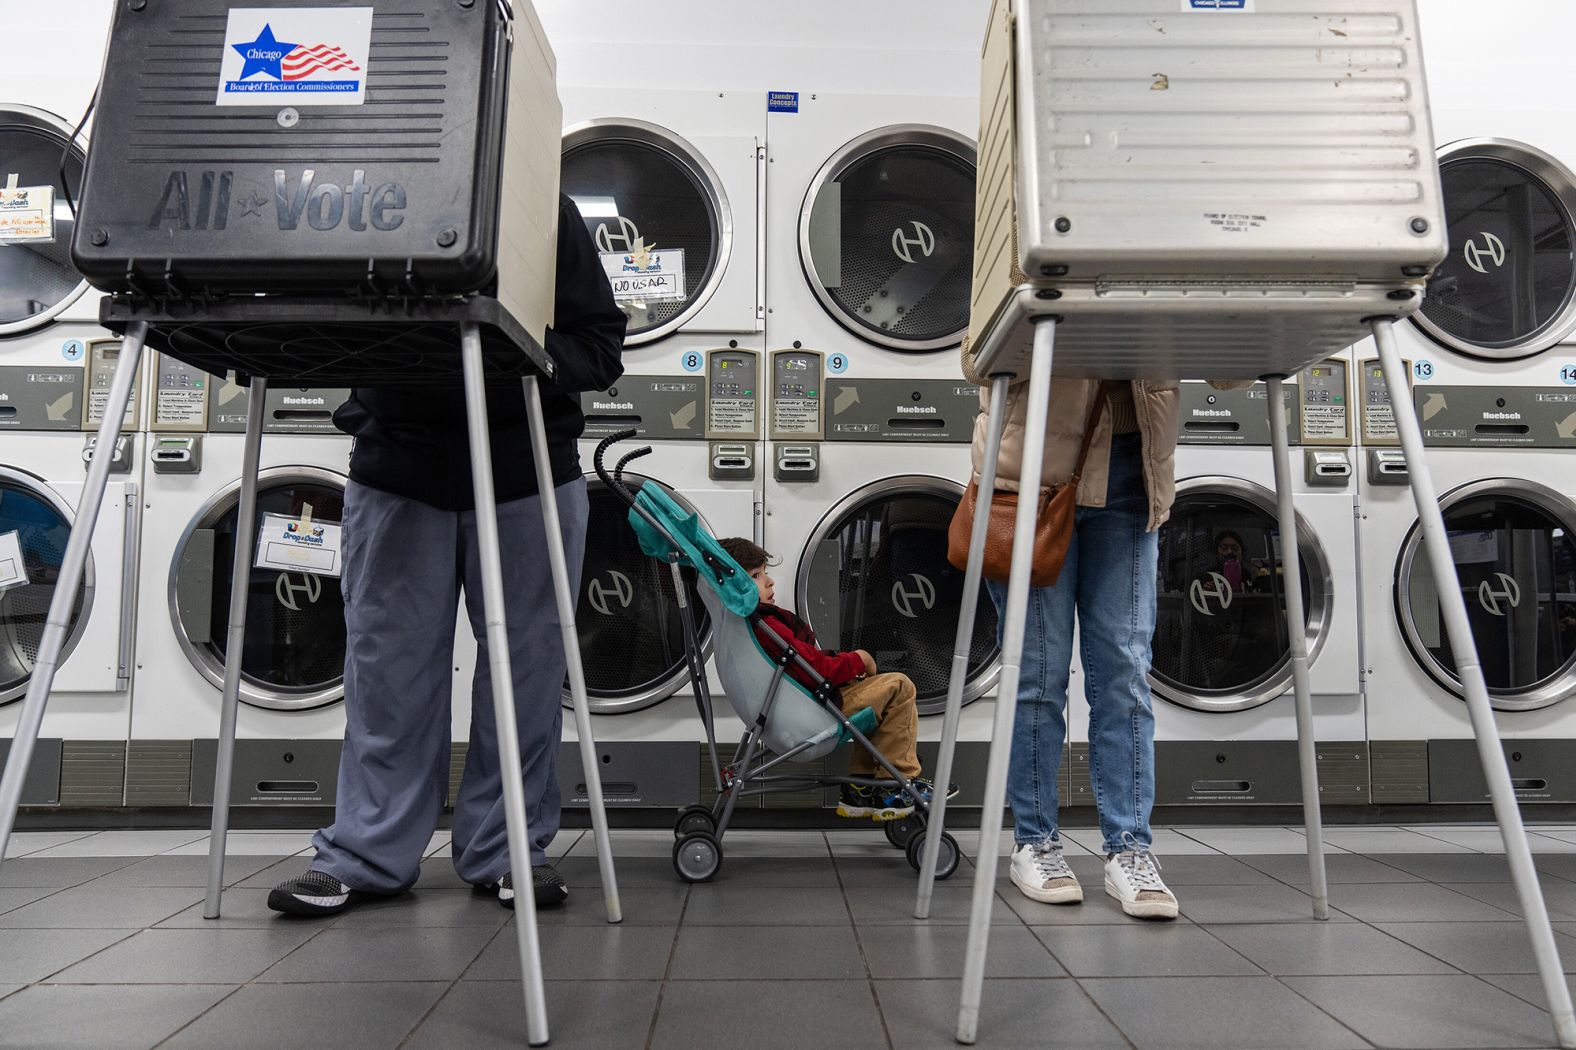 Zachary Valles-Perez waits as his parents, Antonio Perez and Christina Valle-Perez, vote at a laundromat in Chicago on Election Day.